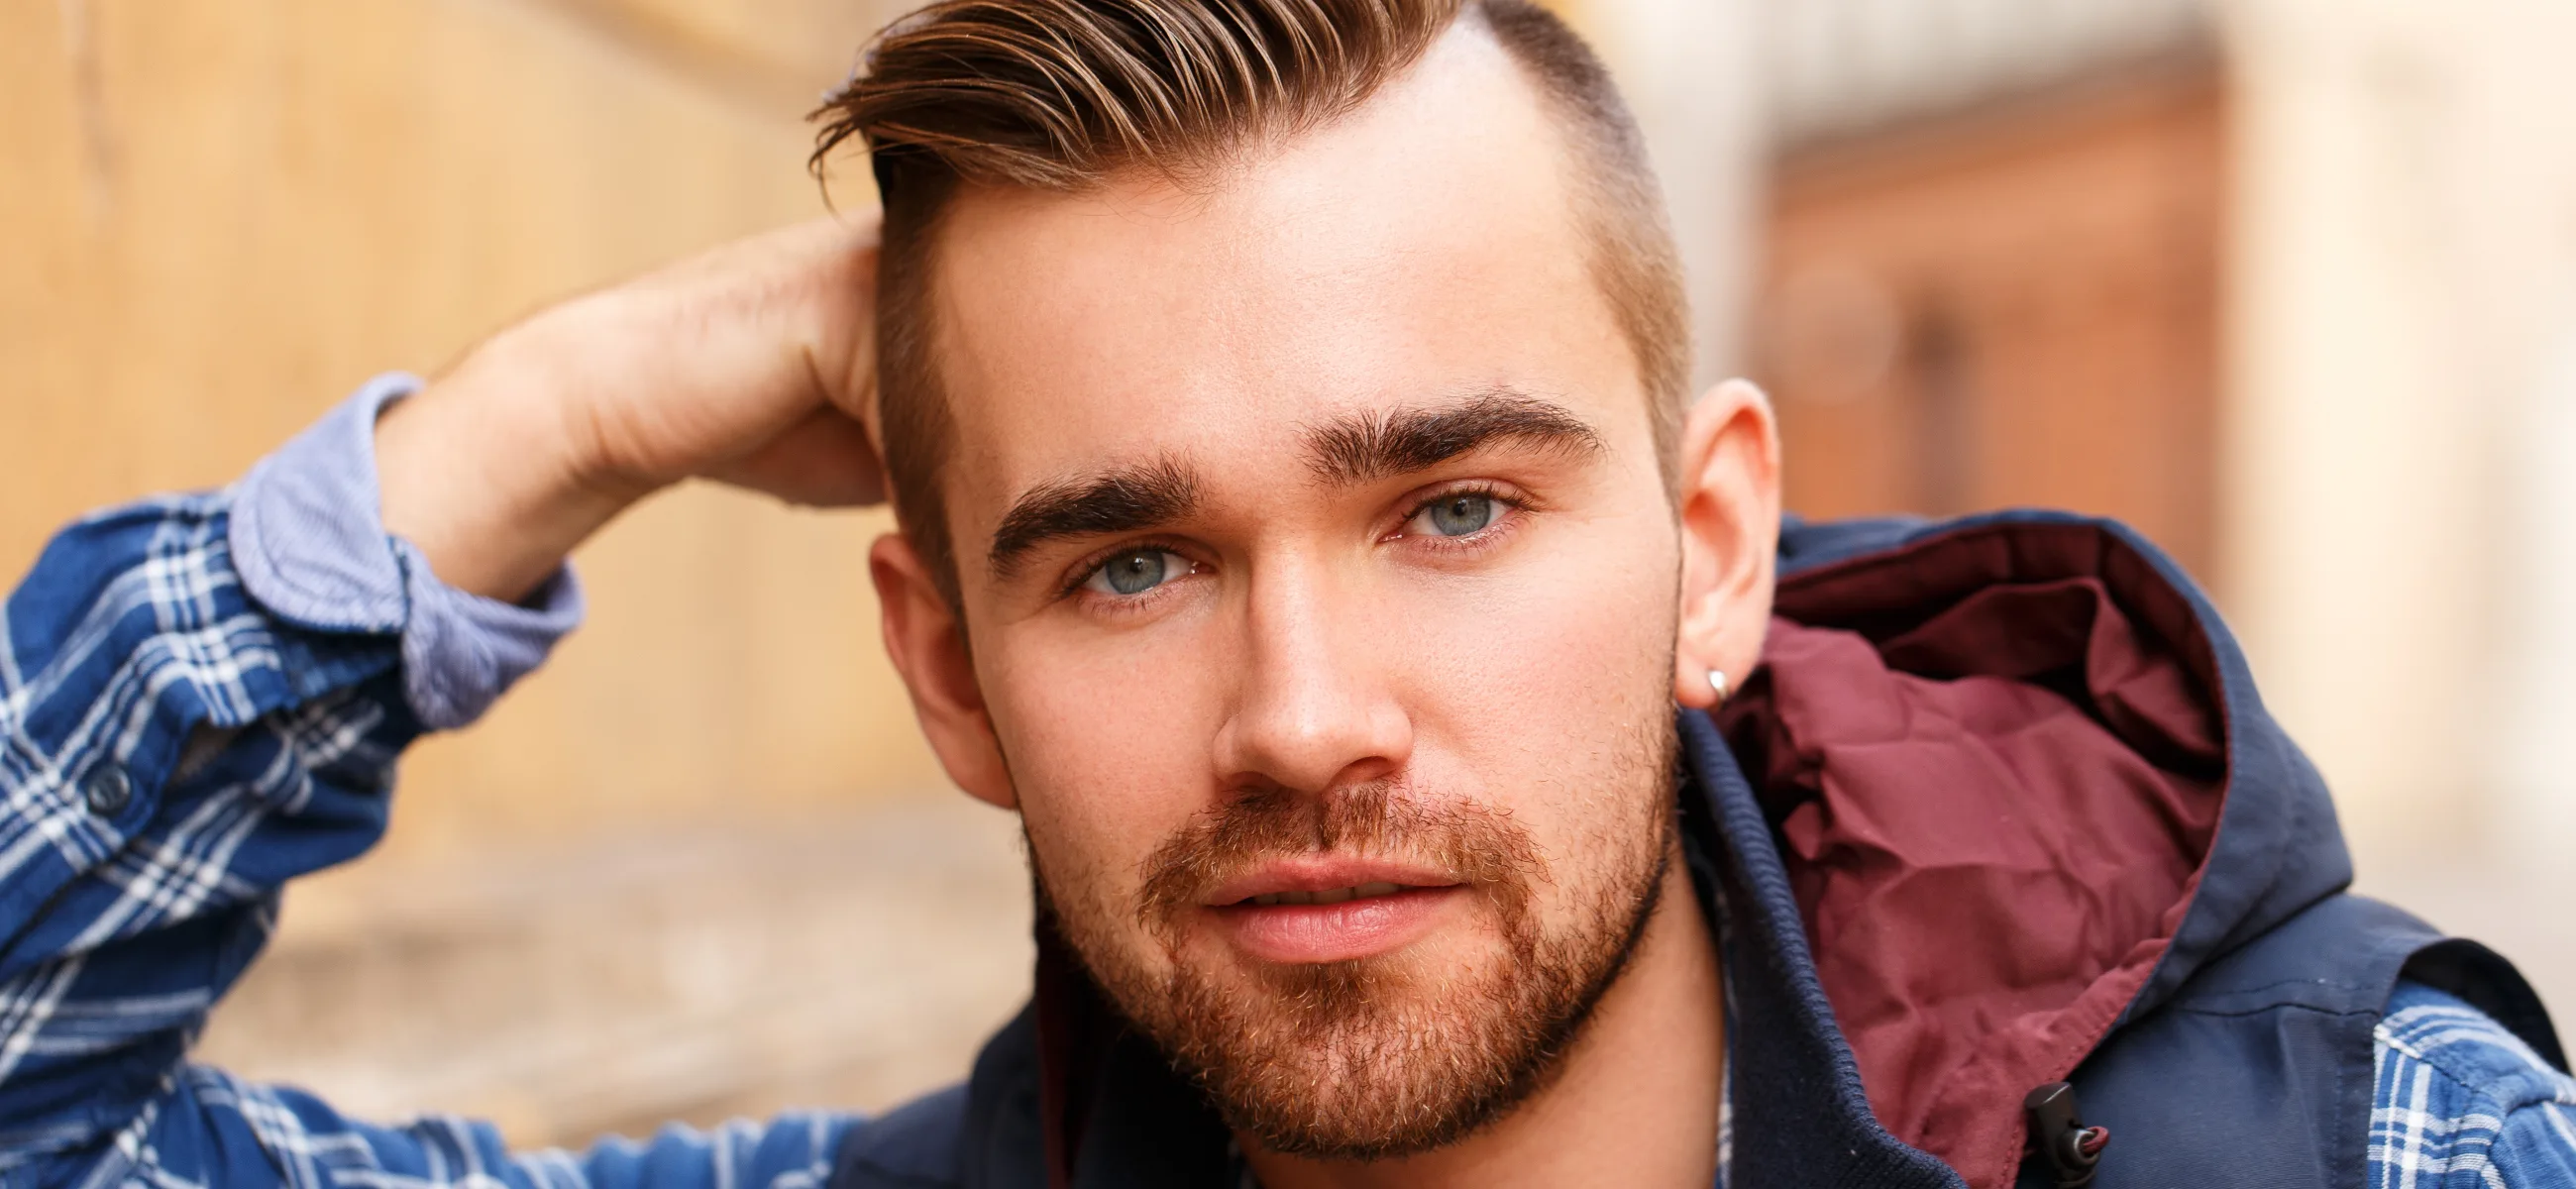 A complete guide to hair color for men